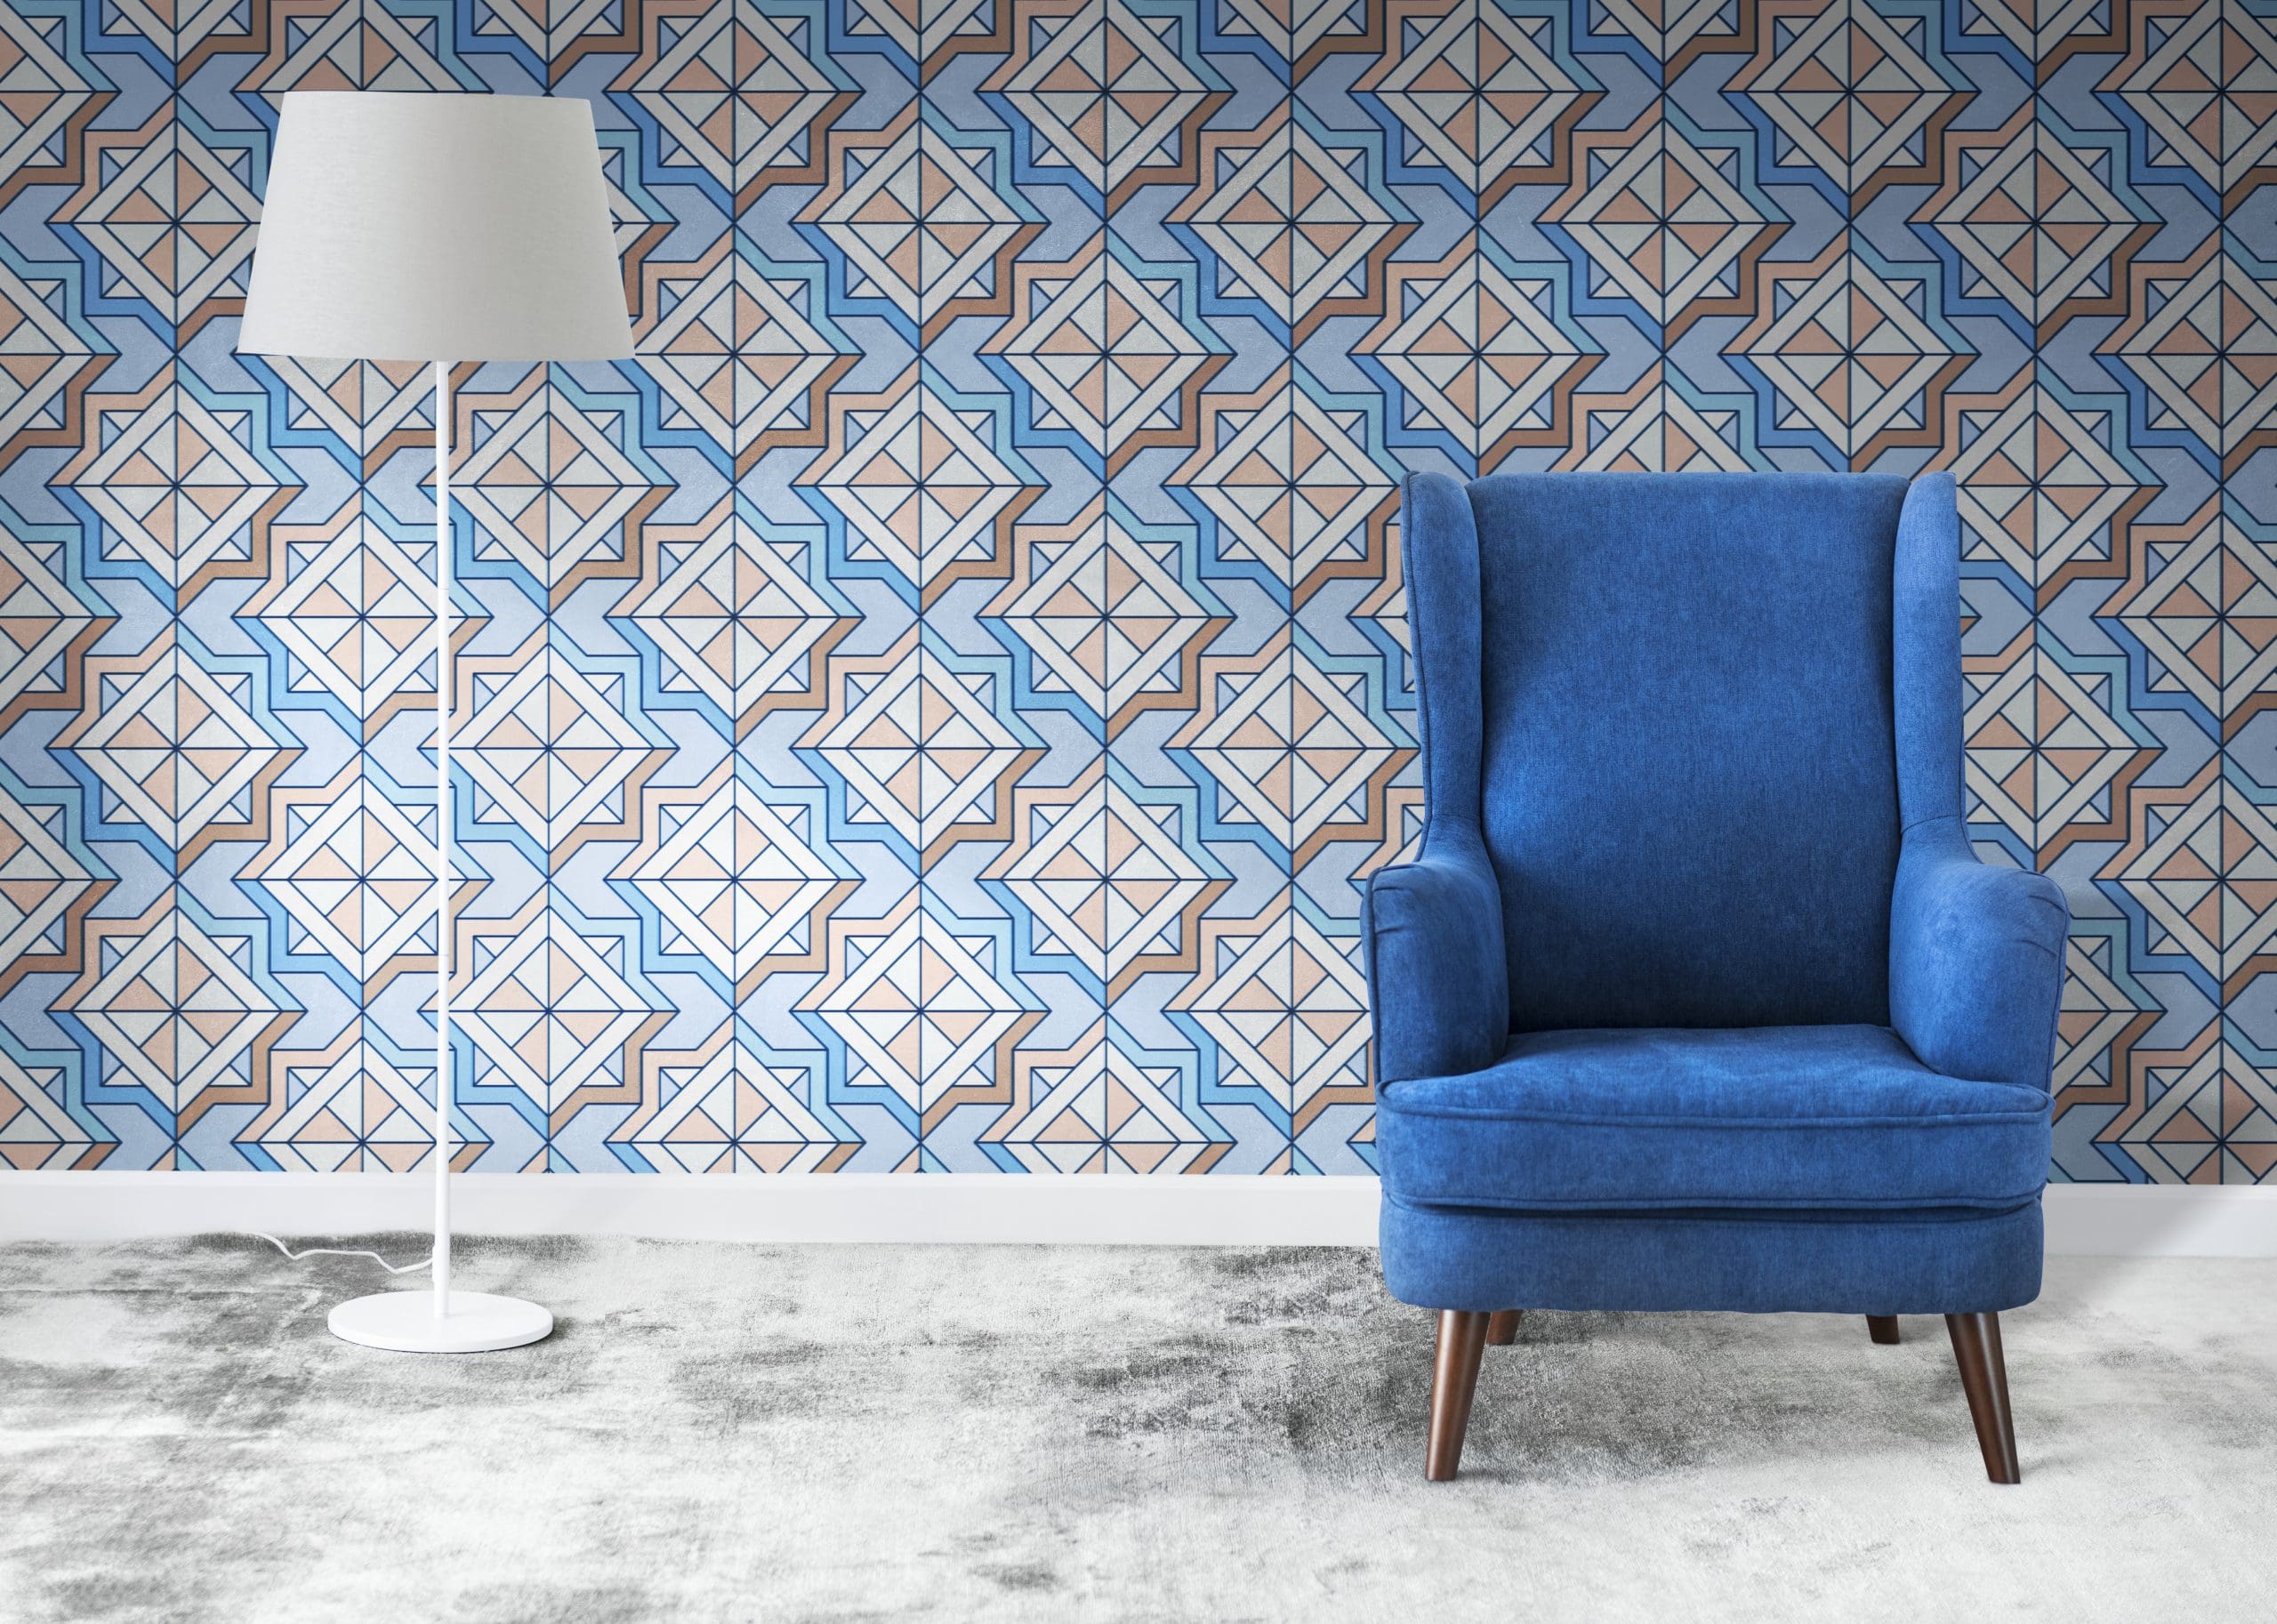 Blue Chair in Room Where Homeowners are Applying Wallpaper